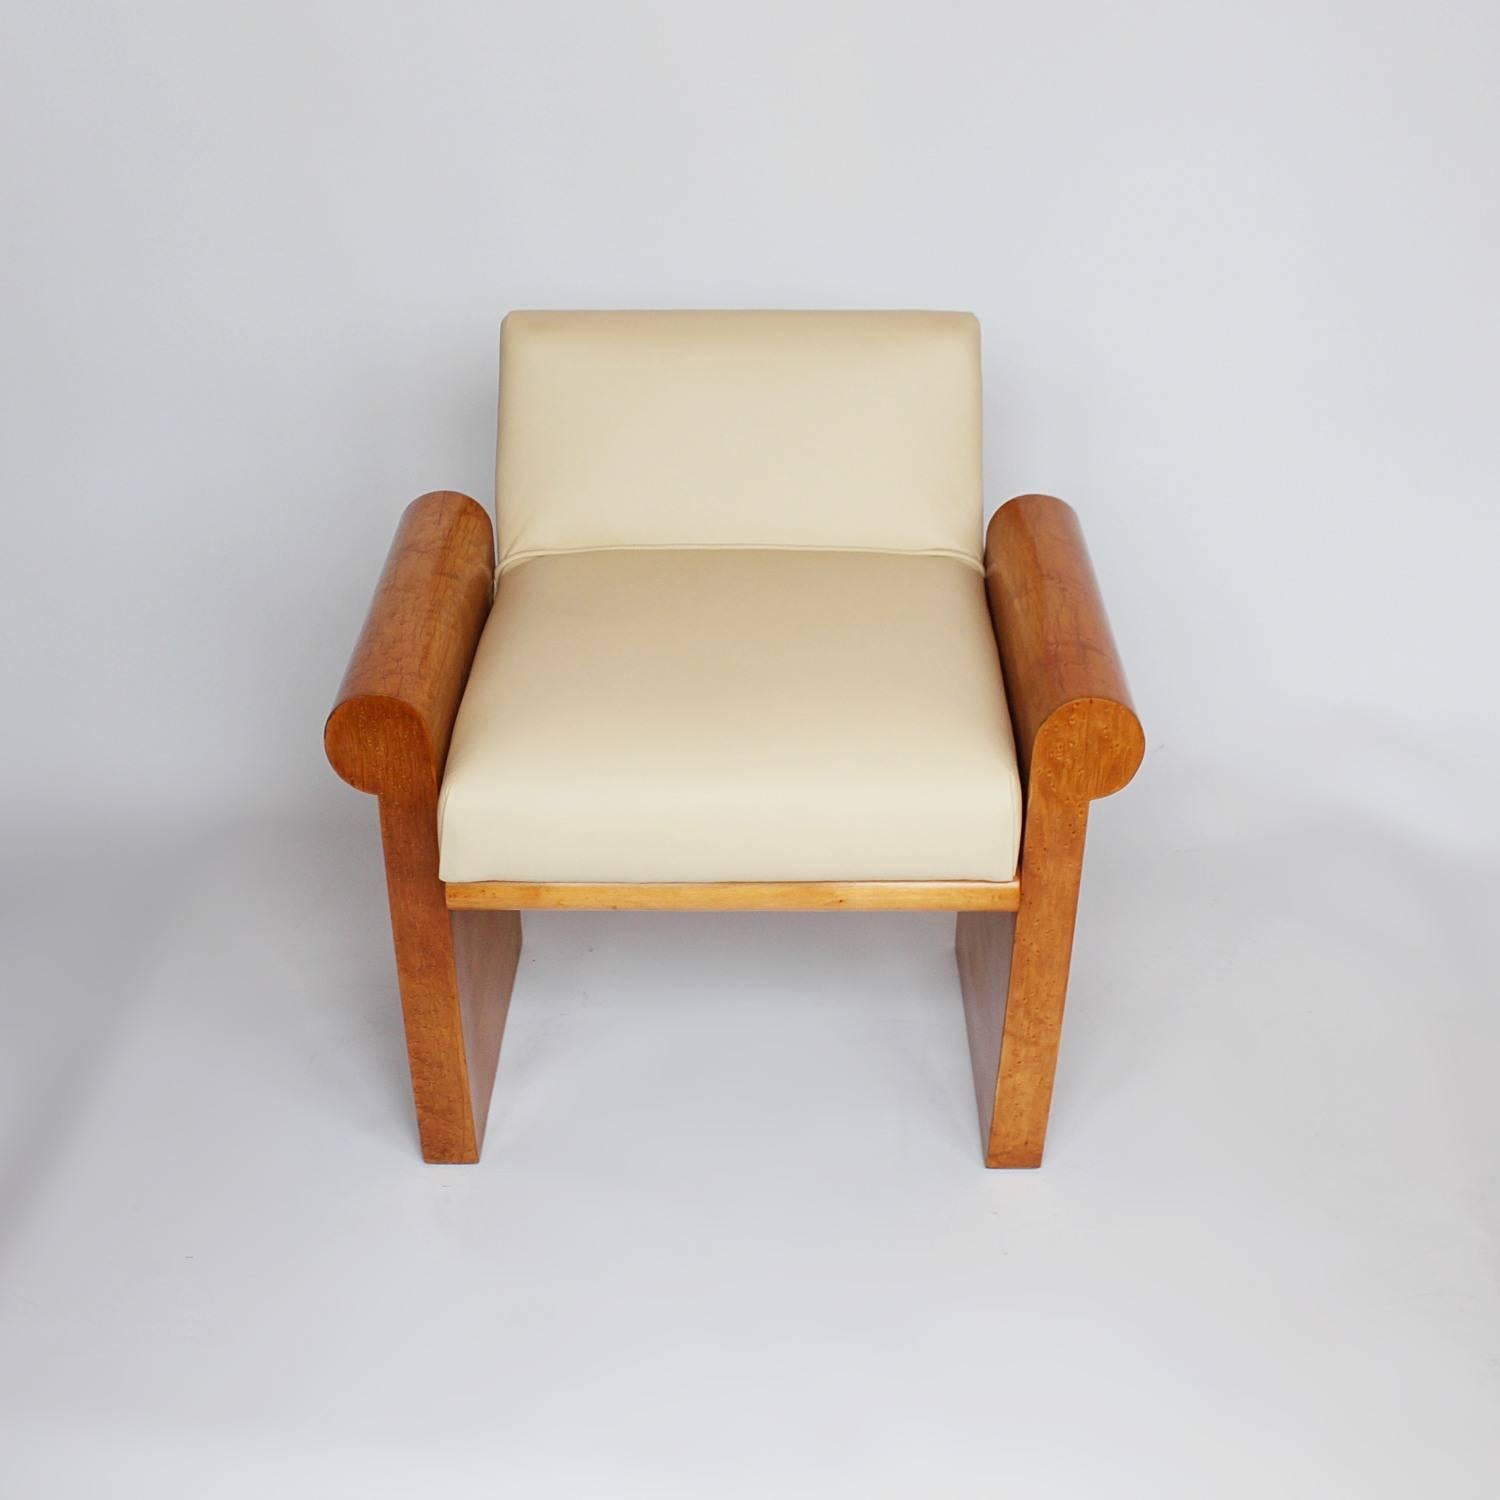 An Art Deco stool designed by Ray Hille. Birds eye maple with scrolled hand rests and an angled seat back. Upholstered in cream leather.

Dimensions: H 62cm, W 64cm, D 55cm, Seat H 45cm, Seat D 40cm

Origin: English

Date:  circa 1930

Item No: